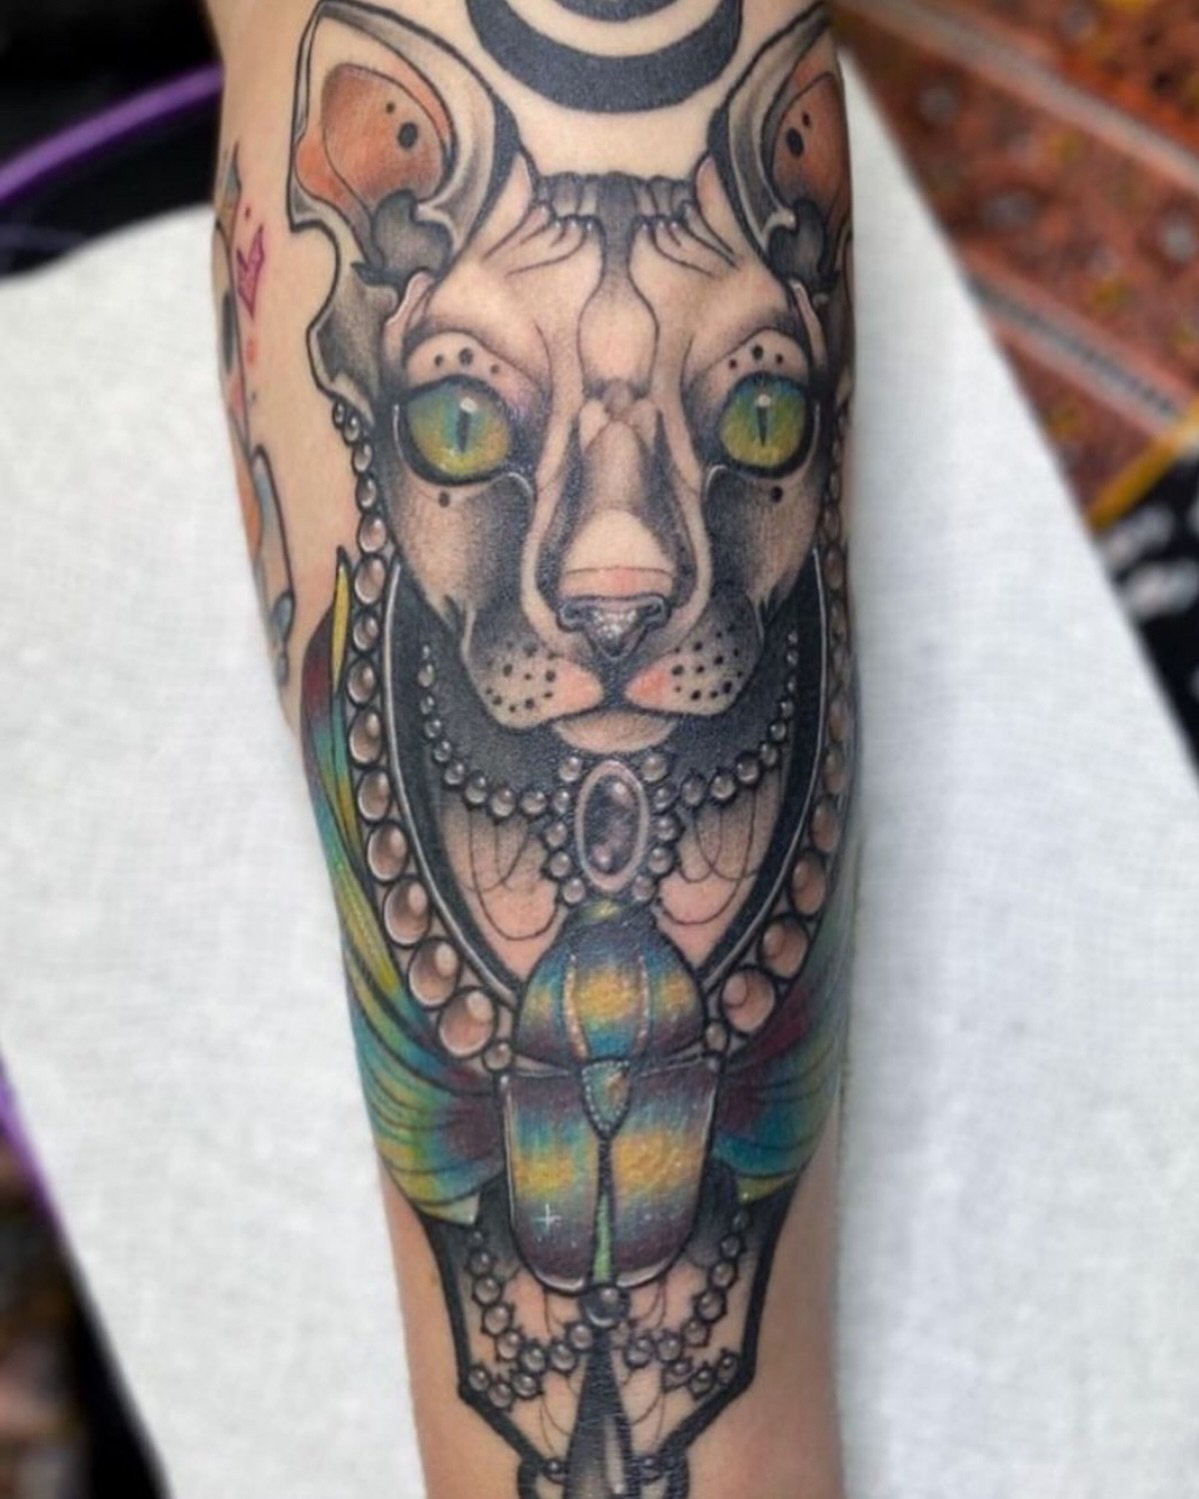 Tattooing by @meganech_tattoos 🐱✨✨ now taking appointments! To reserve submit a form on our website or use the contact on her page. 
thehivetattoo.com
.
.
.
.
.
.
.
.
.
.
.
.
.
.
.
.
#thehivetattoo #portlandoregon #portlandtattooartist #portlandtatt